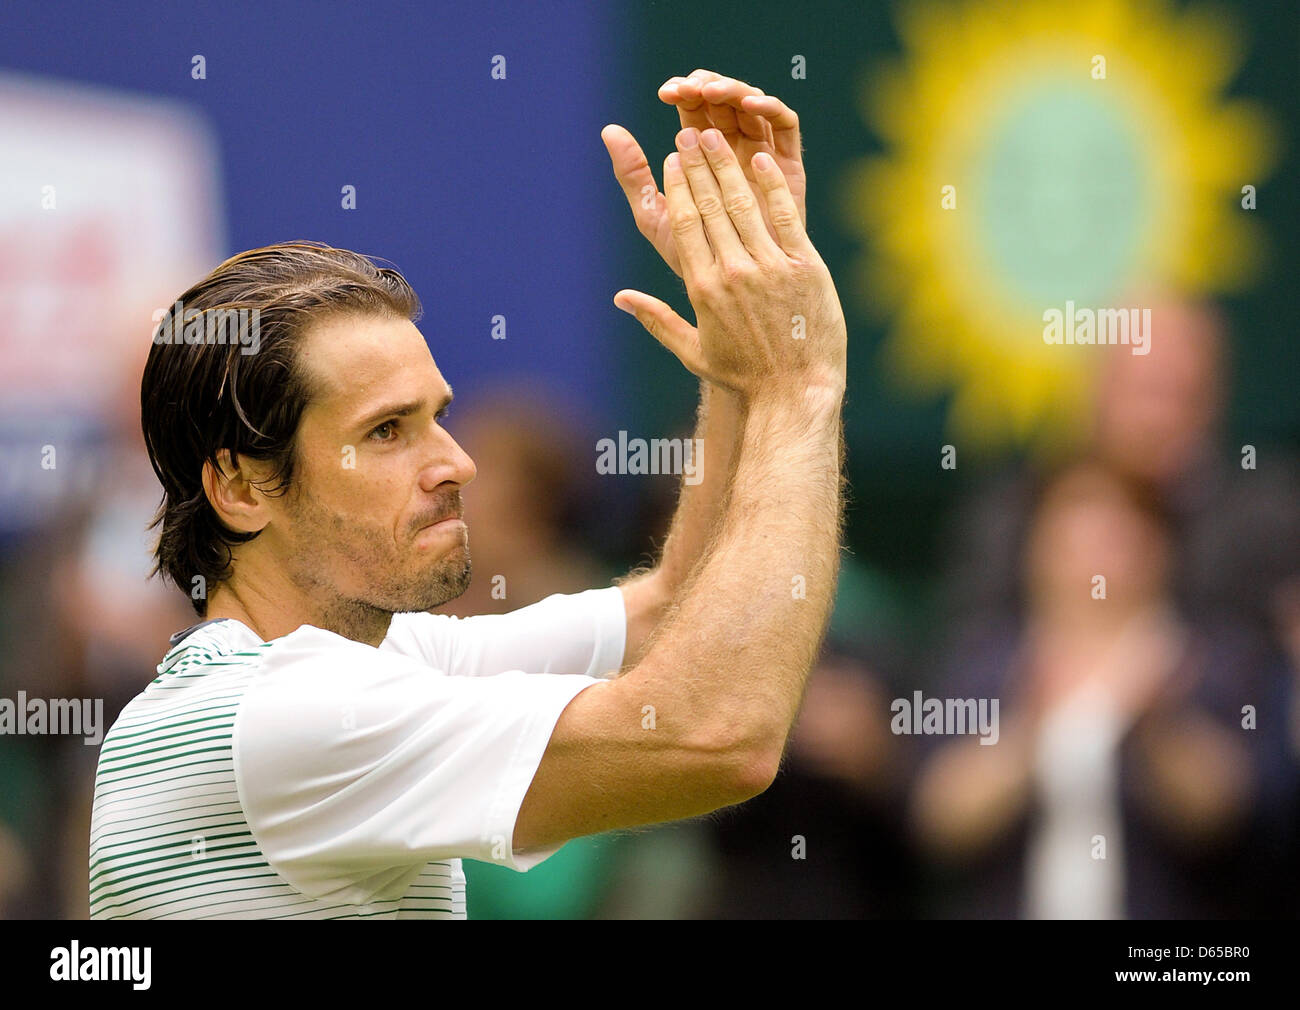 Germany's tennis player Tommy Haas cheers after the ATP Tennis Tournament Gerry Weber Open against Germany's Kohlschreiber in Halle, Germany, 16 June 2012. Photo: CHRISTIAN WEISCHE Stock Photo